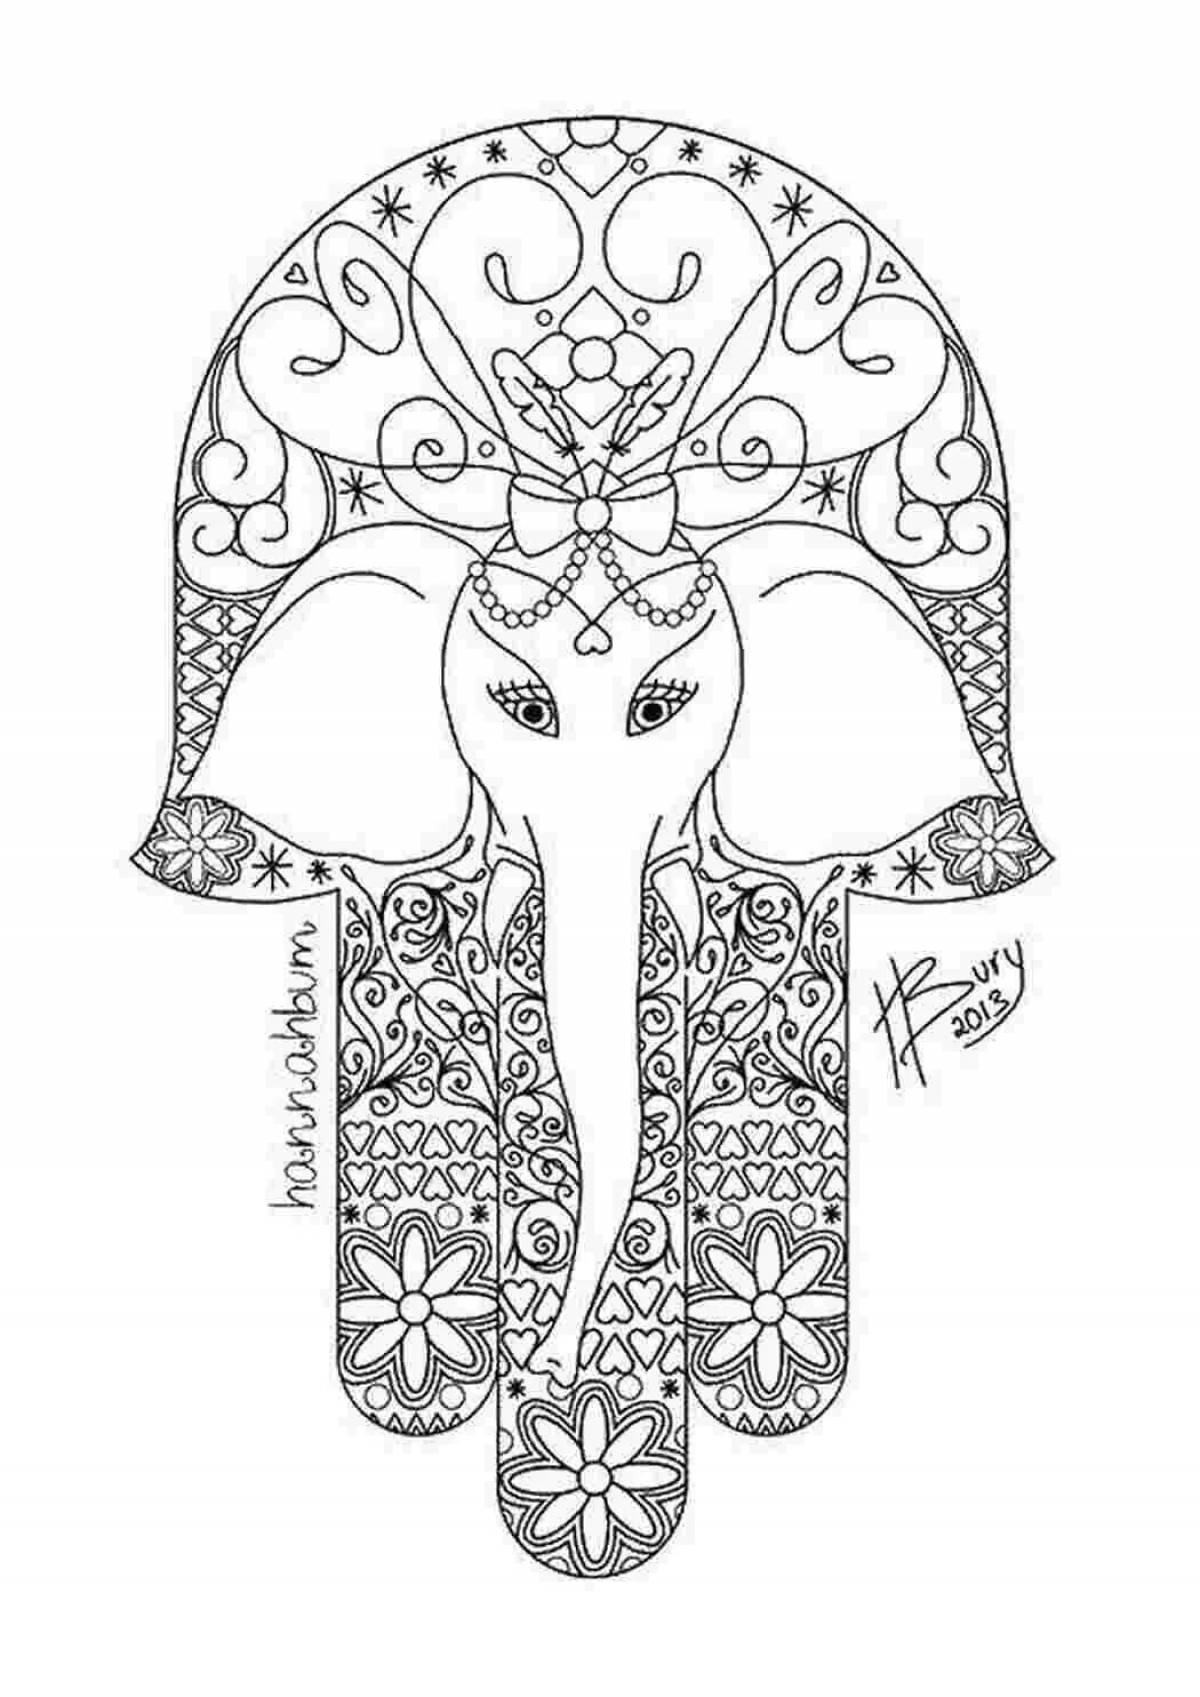 Coloring page spectacular amulet